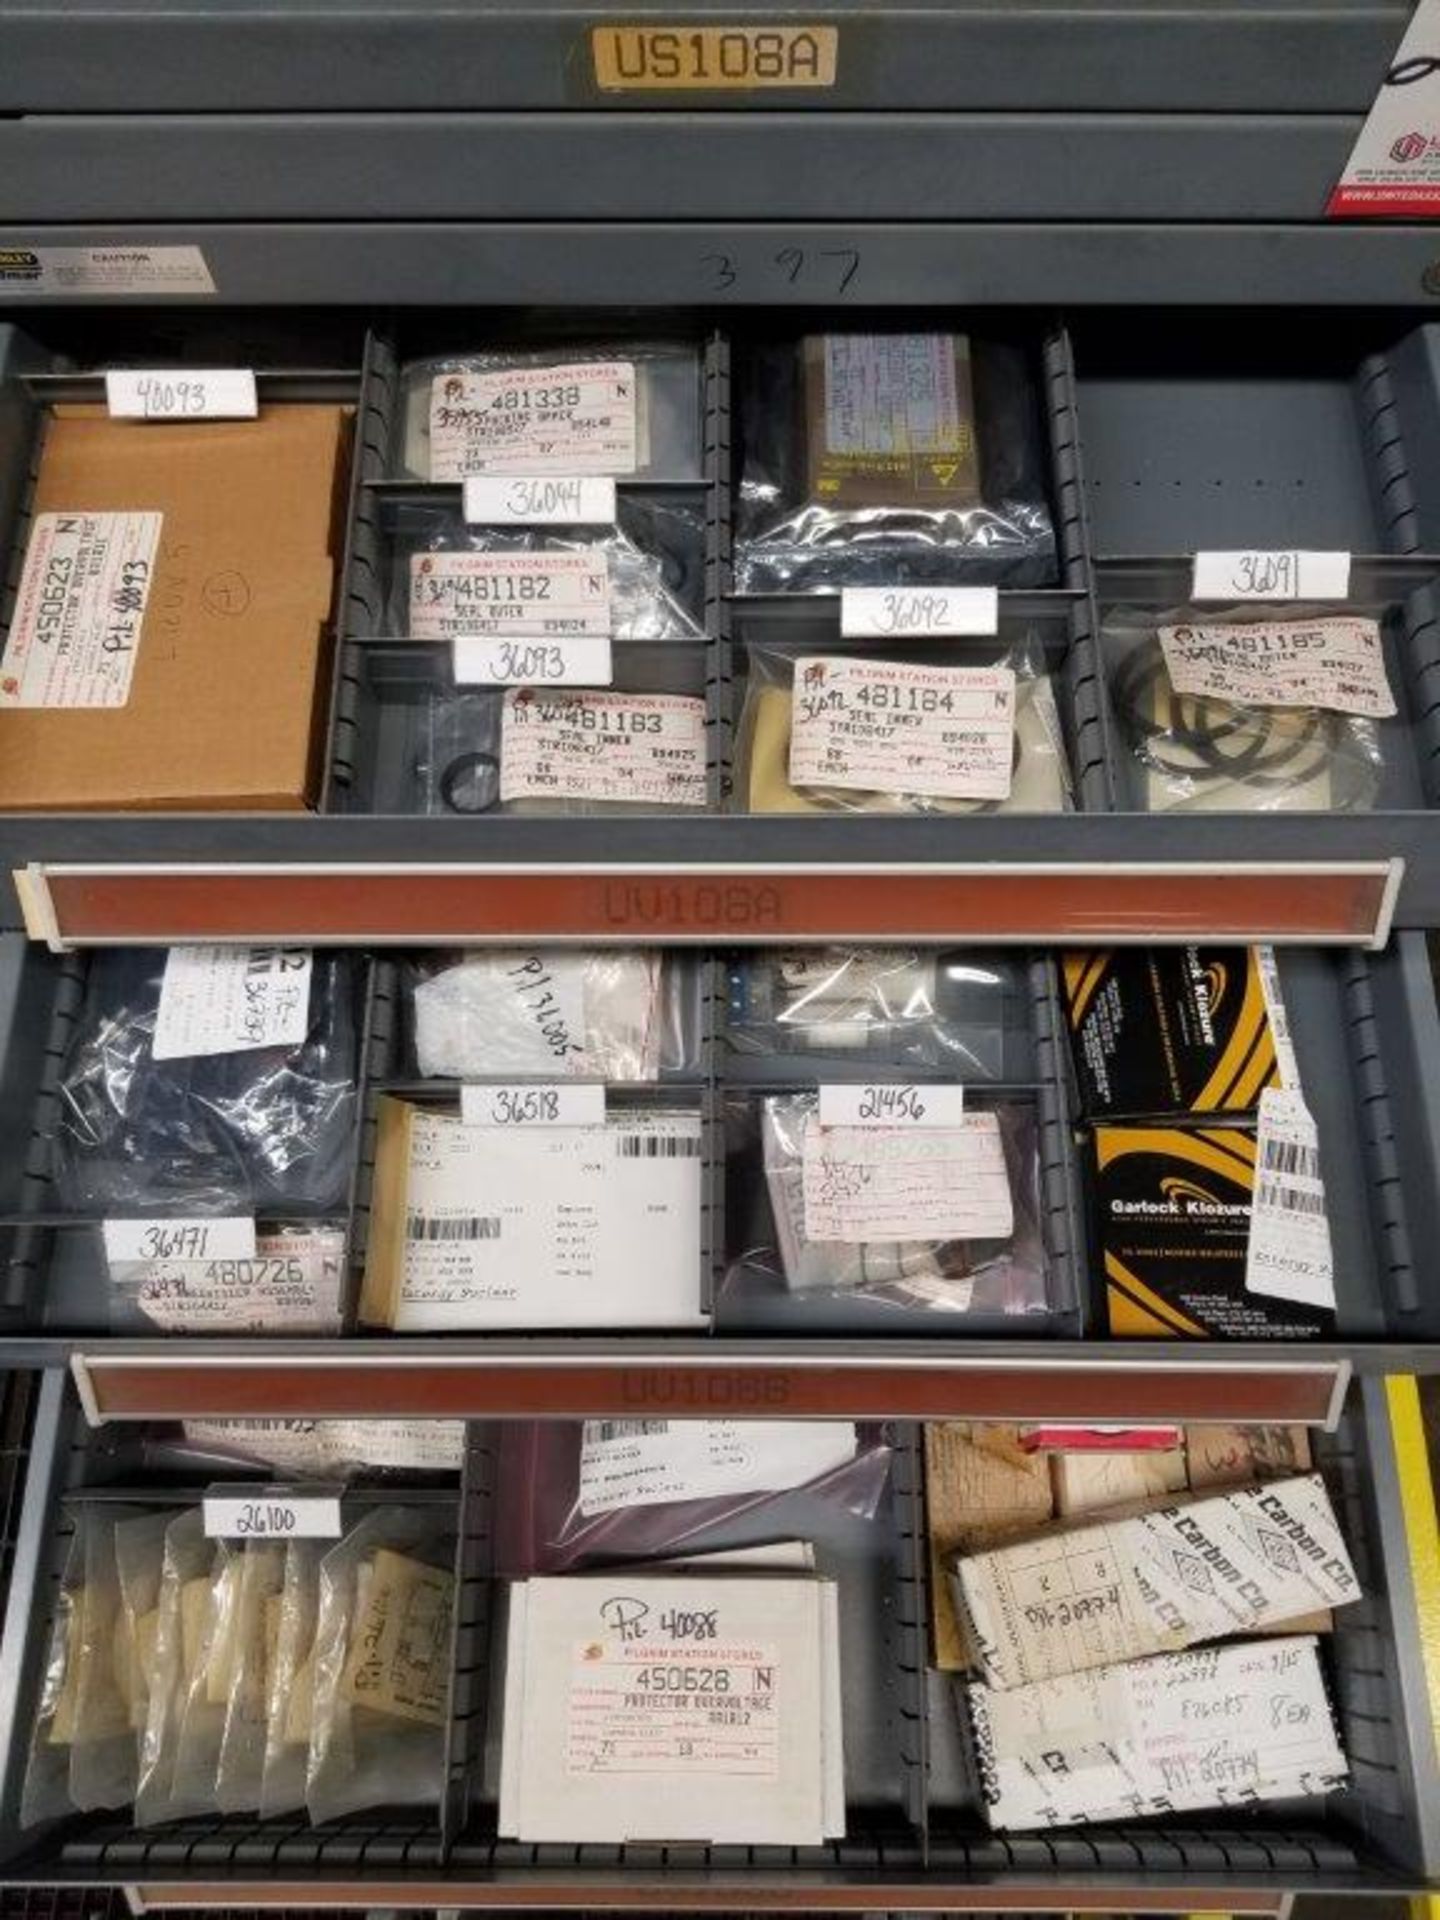 LOT - CONTENTS ONLY OF (16) VIDMAR CABINETS, CONSISTING OF ASSORTED HARDWARE, ELECTRICAL - Image 23 of 41